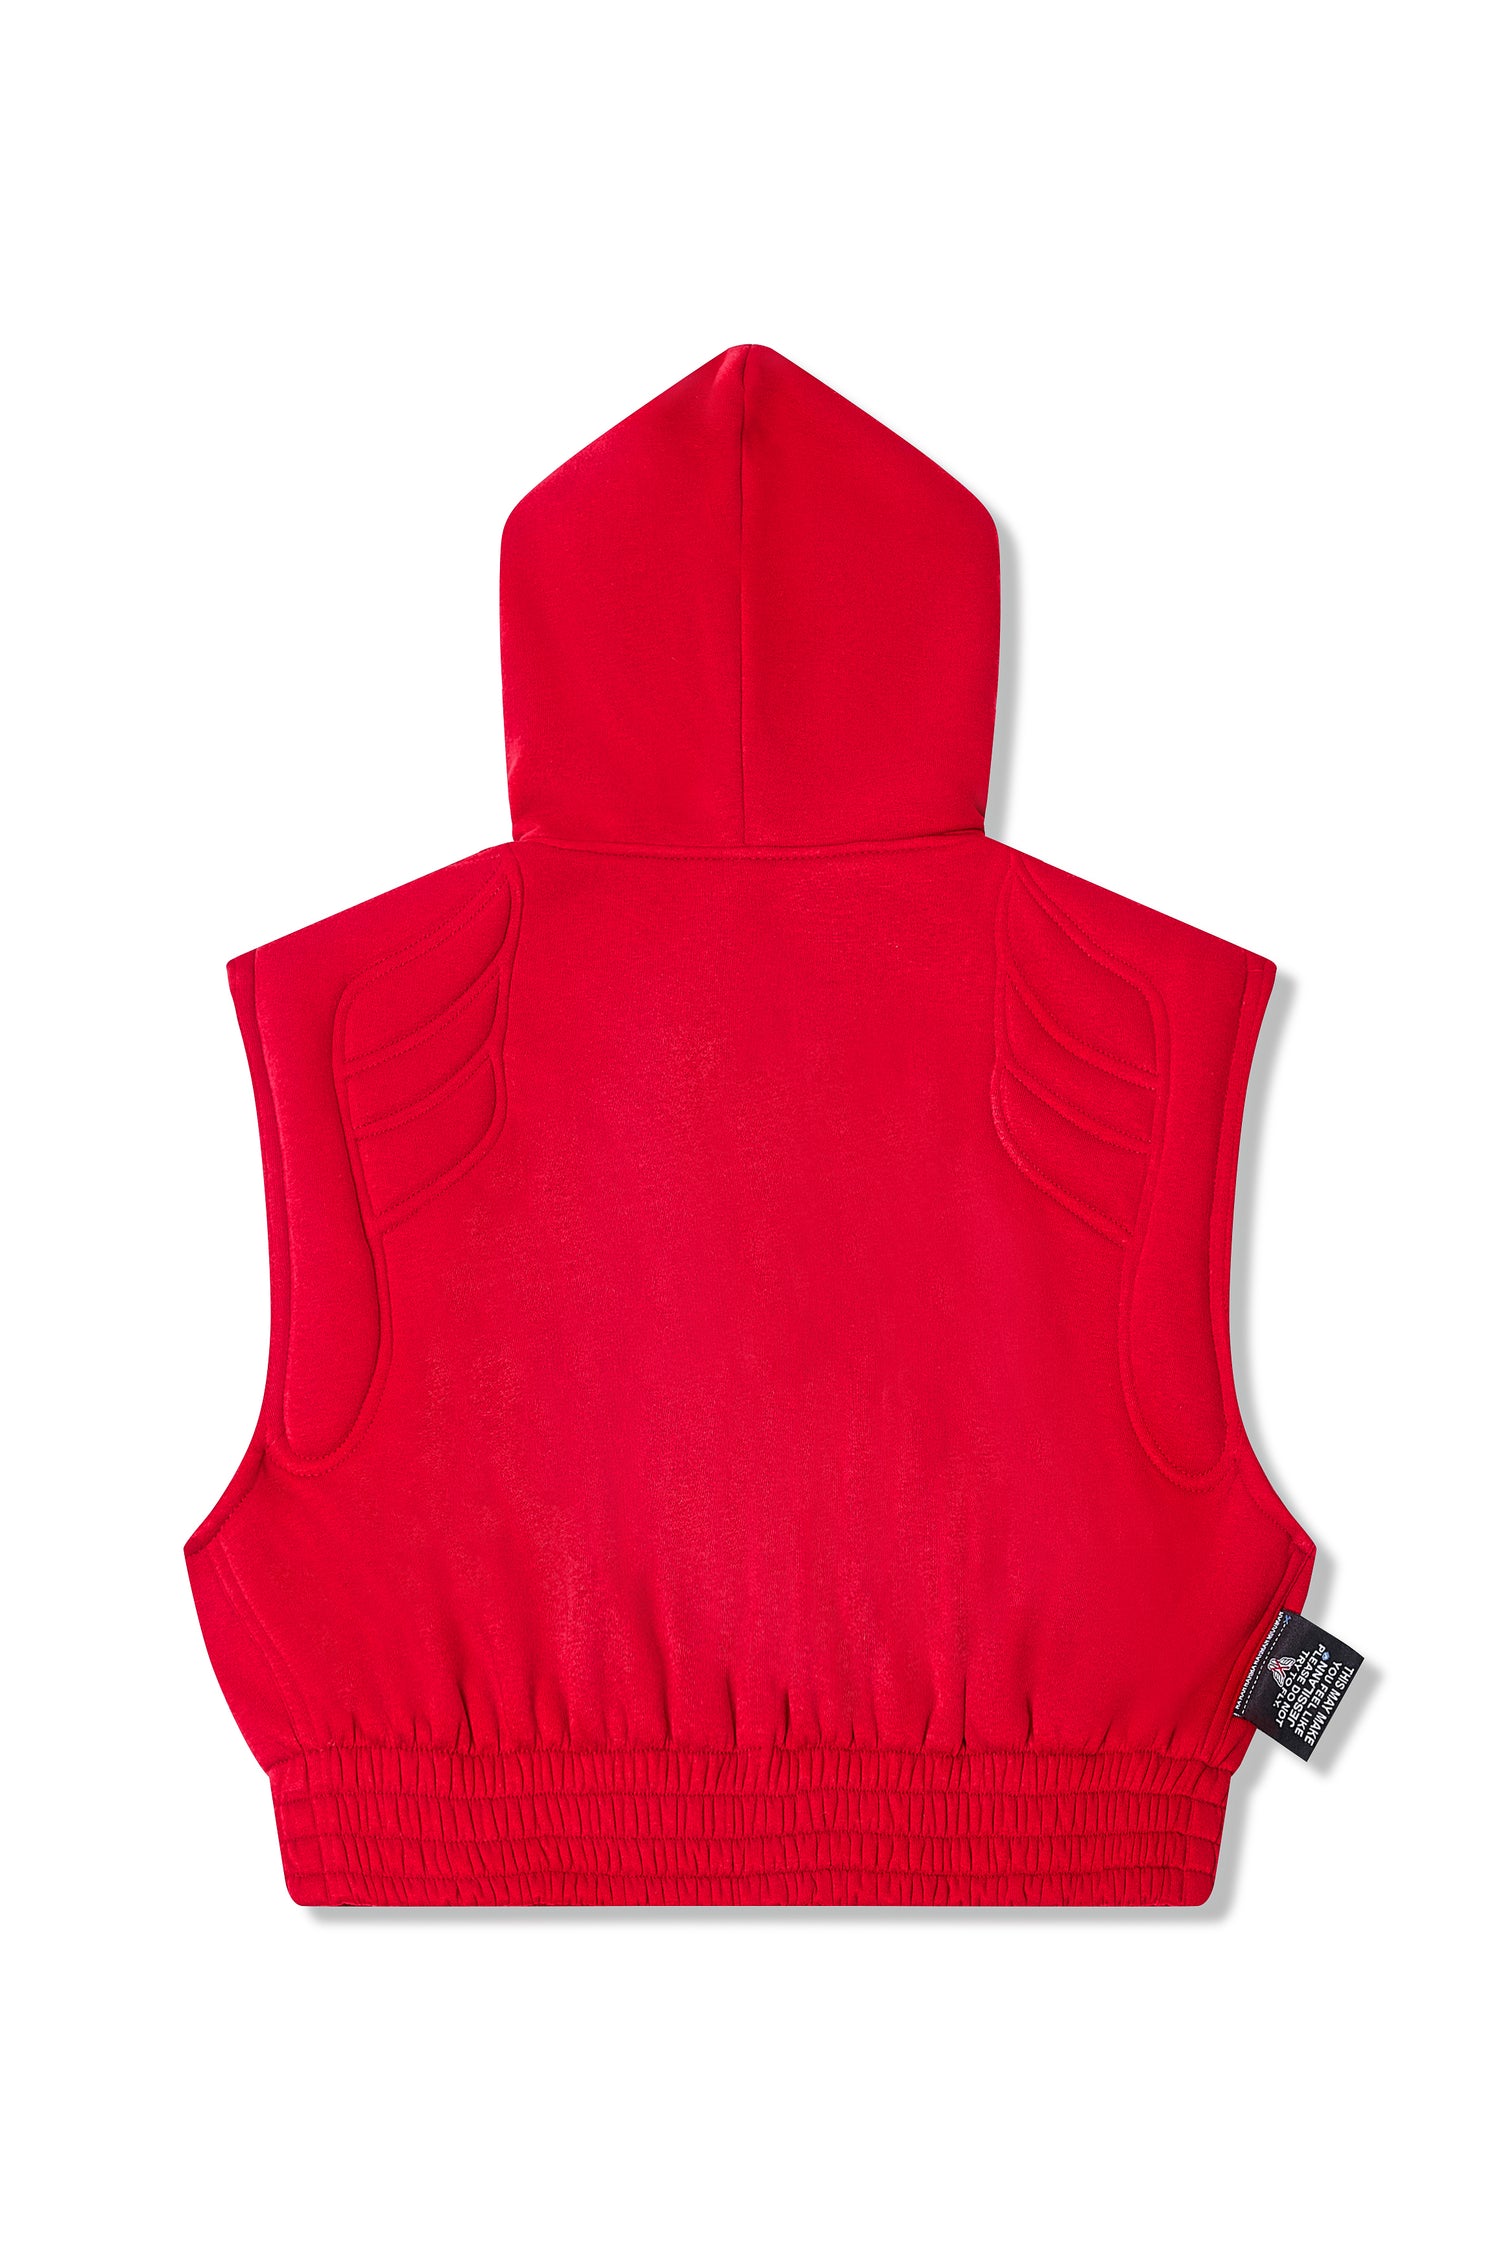 HOODIE CROP COUTURE RED